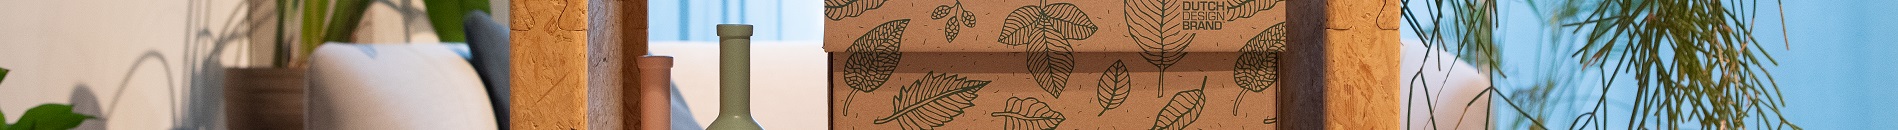 The Natural Leaves Storage Box, decorated with drawings of green leaves on plain cardboard.